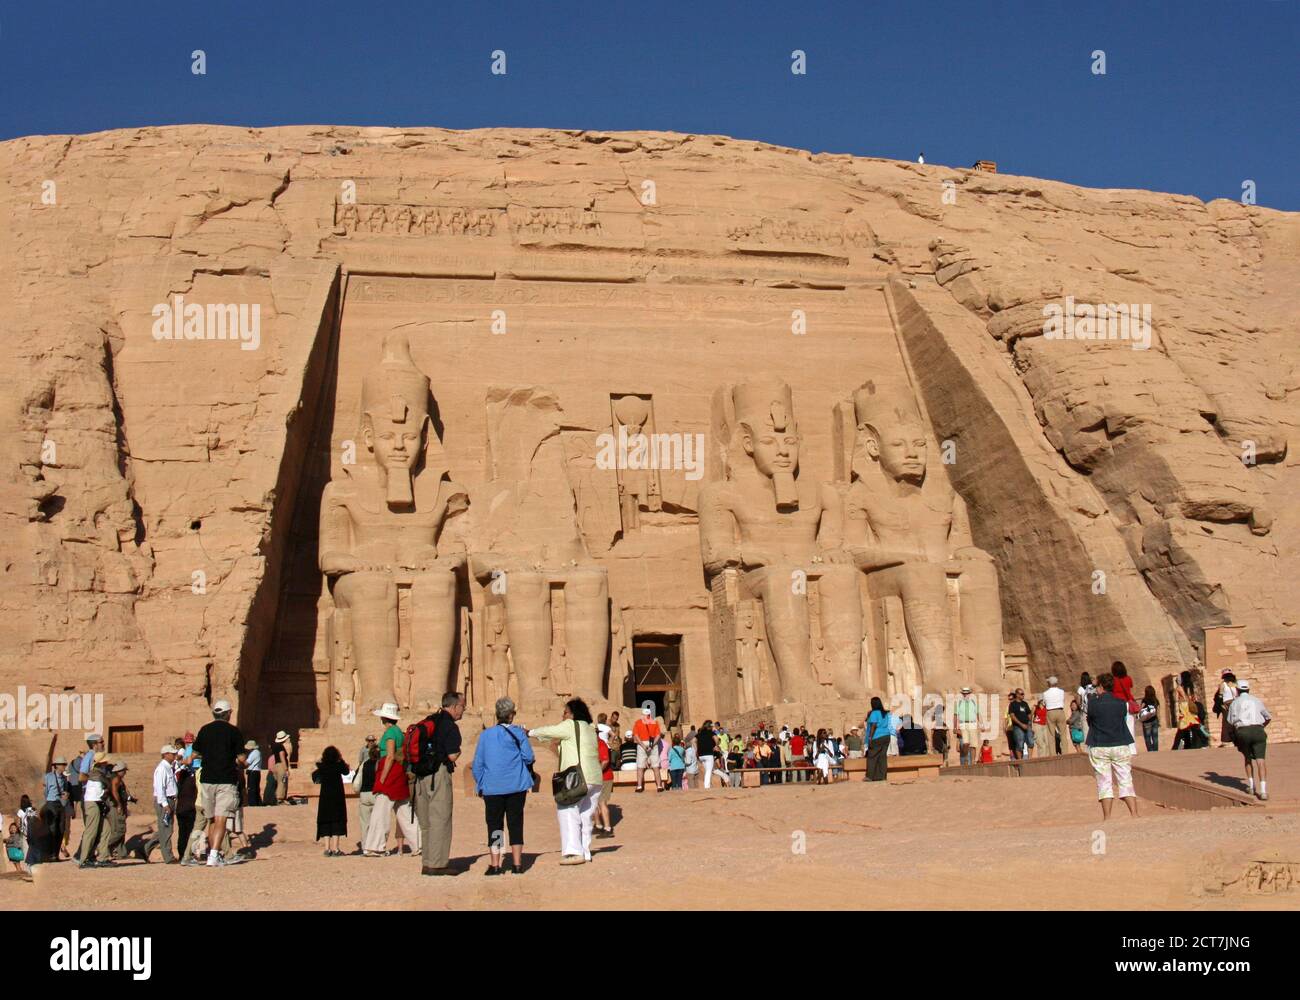 Abu Simbel in Egypt with many tourists visiting the ancient site.  Egypt, 2008 Stock Photo